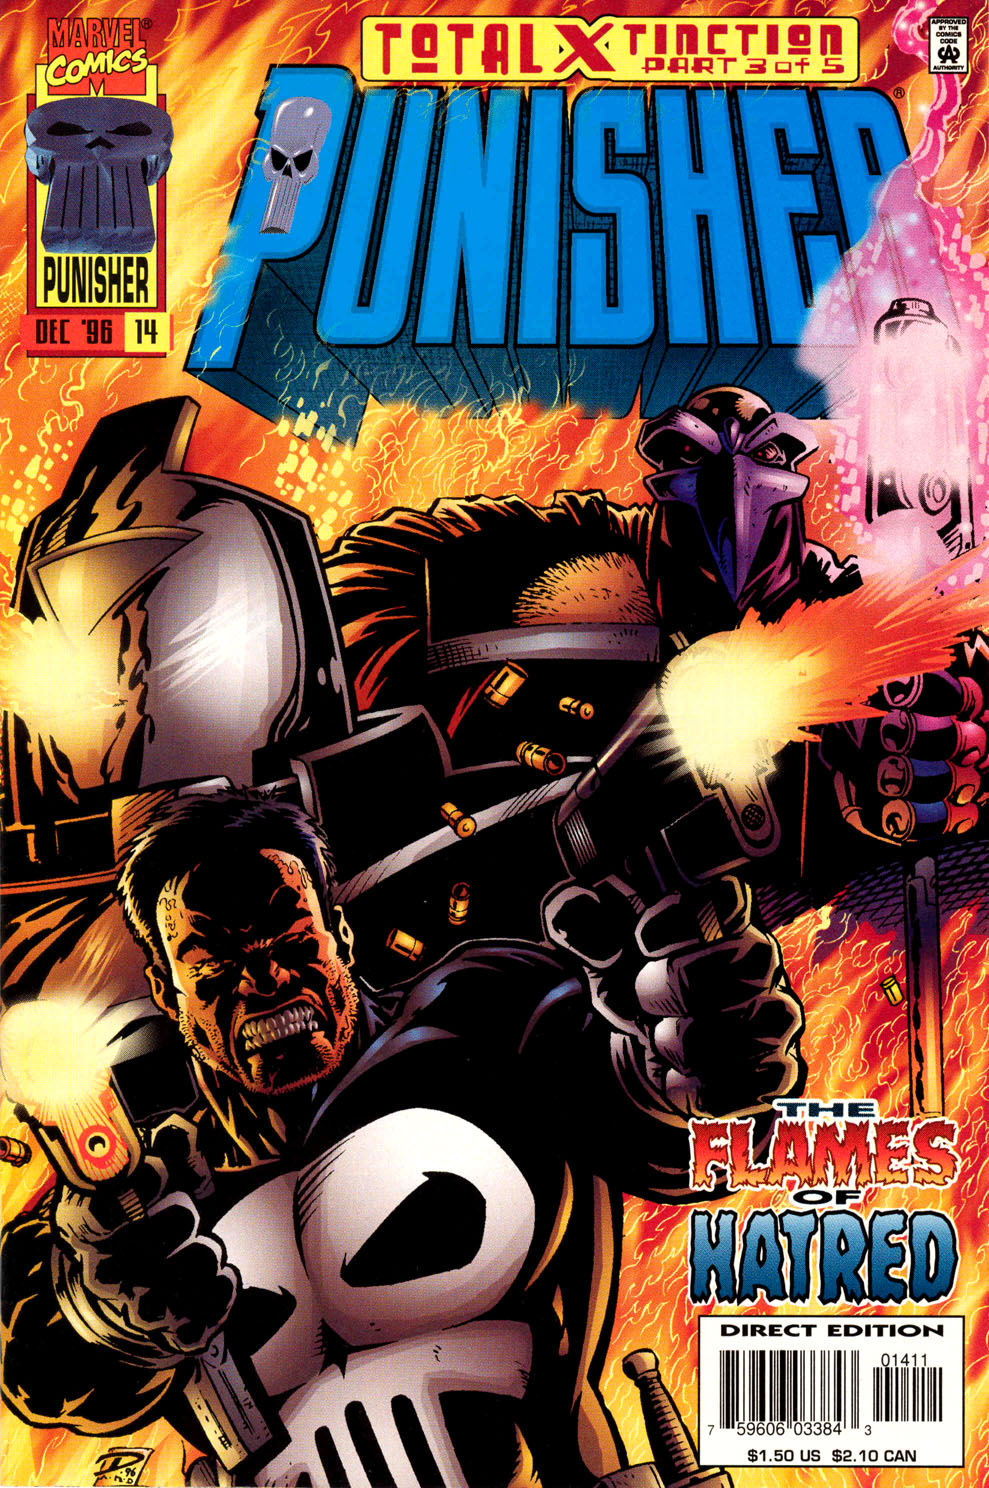 Punisher (1995) issue 14 - Total X-tinction - Page 1